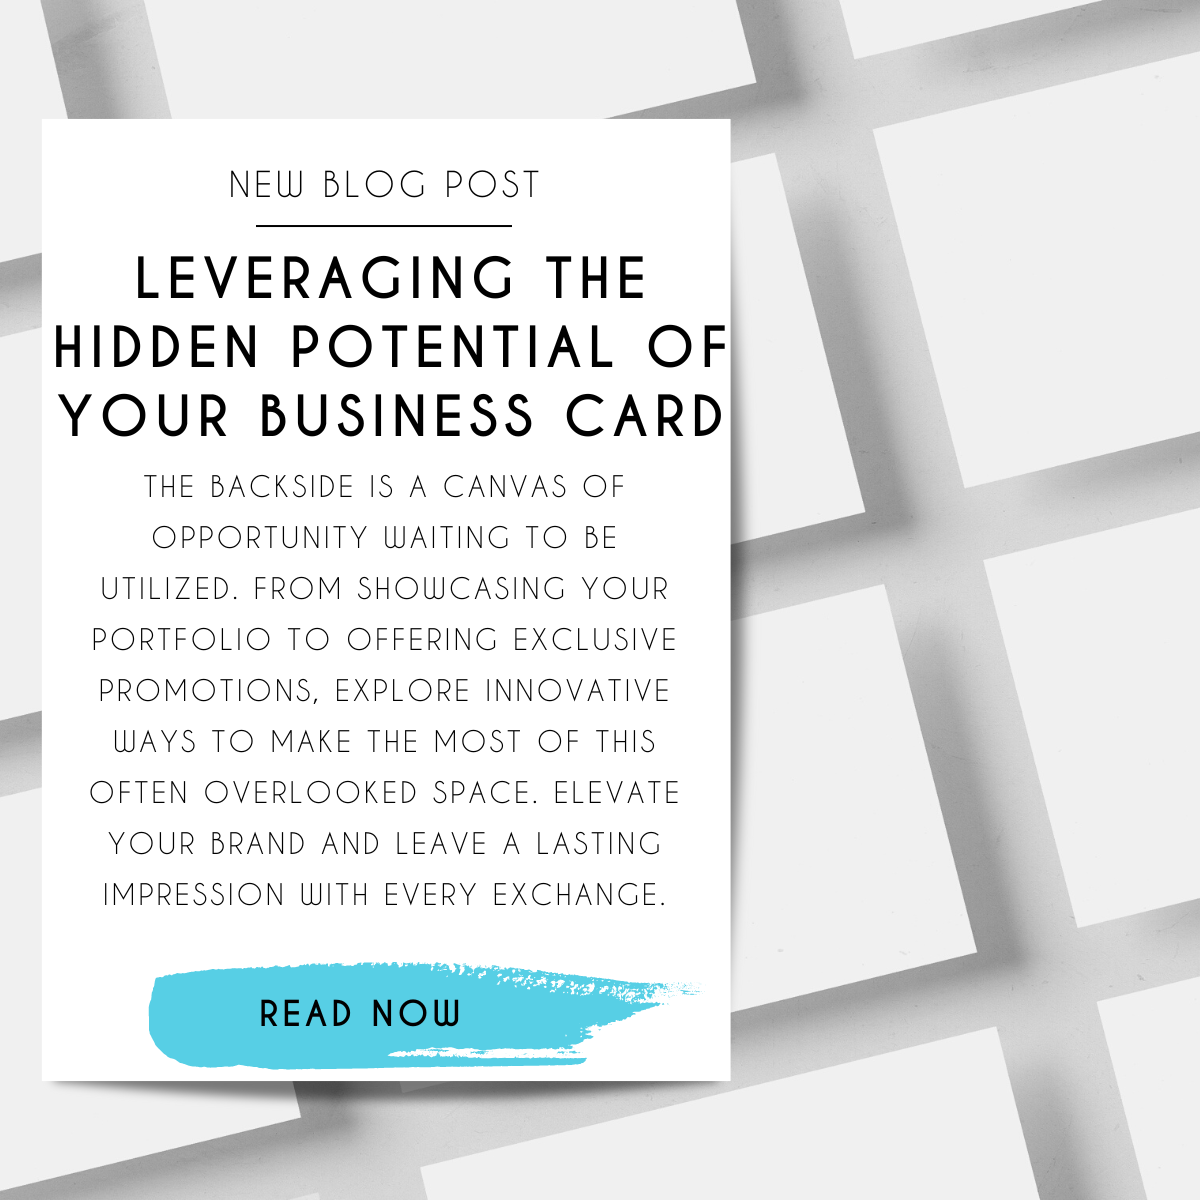 Leveraging the Hidden Potential of Your Business Card